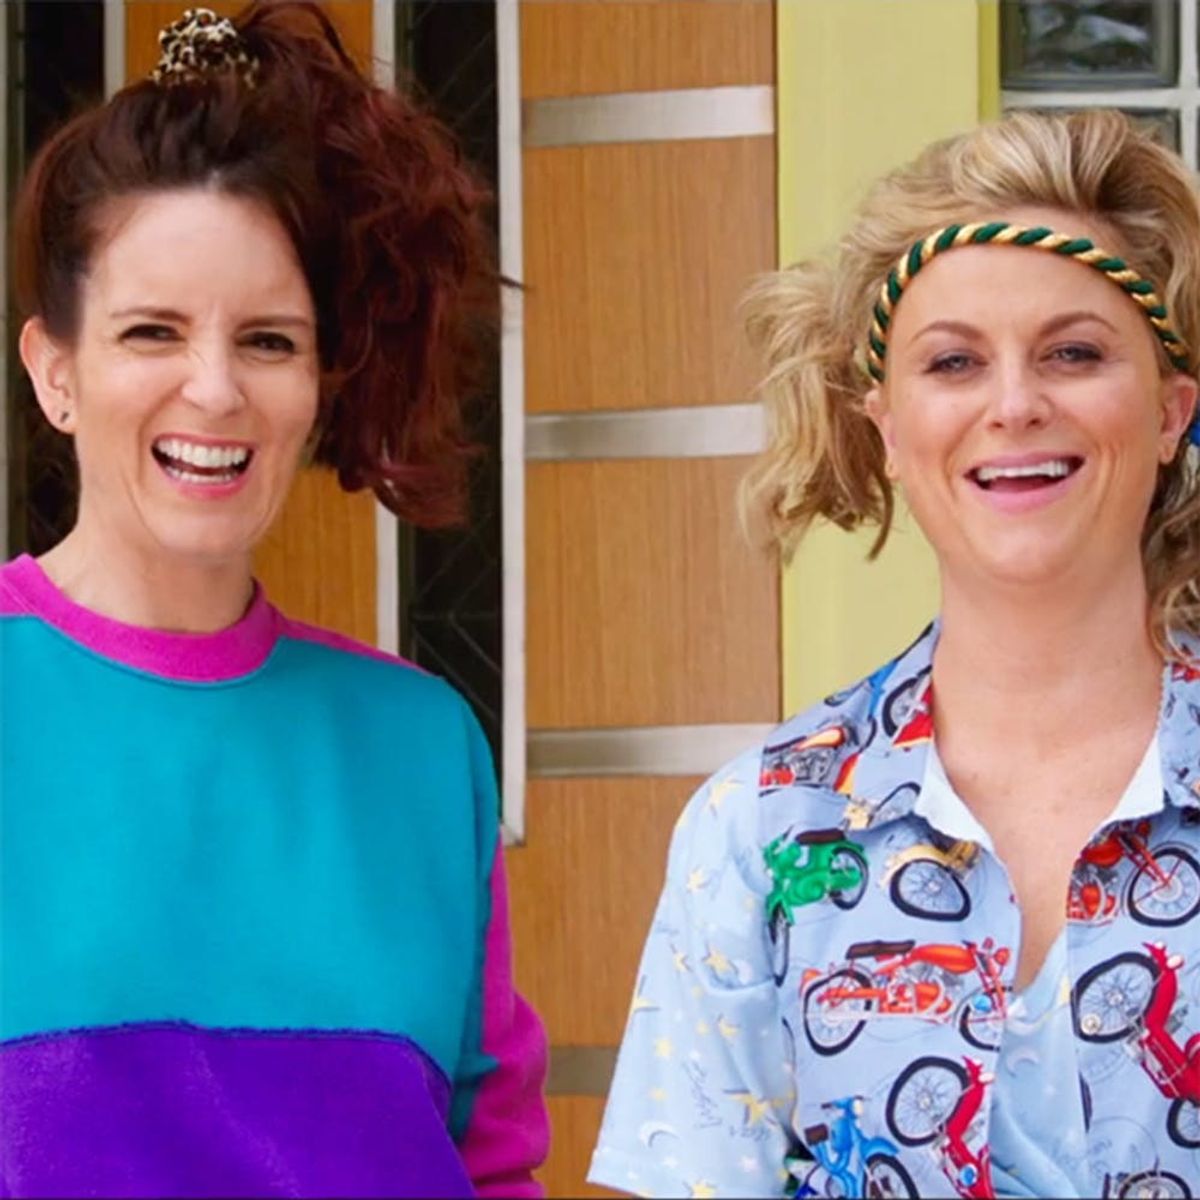 Why You Should Be Excited for the New Tina Fey/Amy Poehler Movie